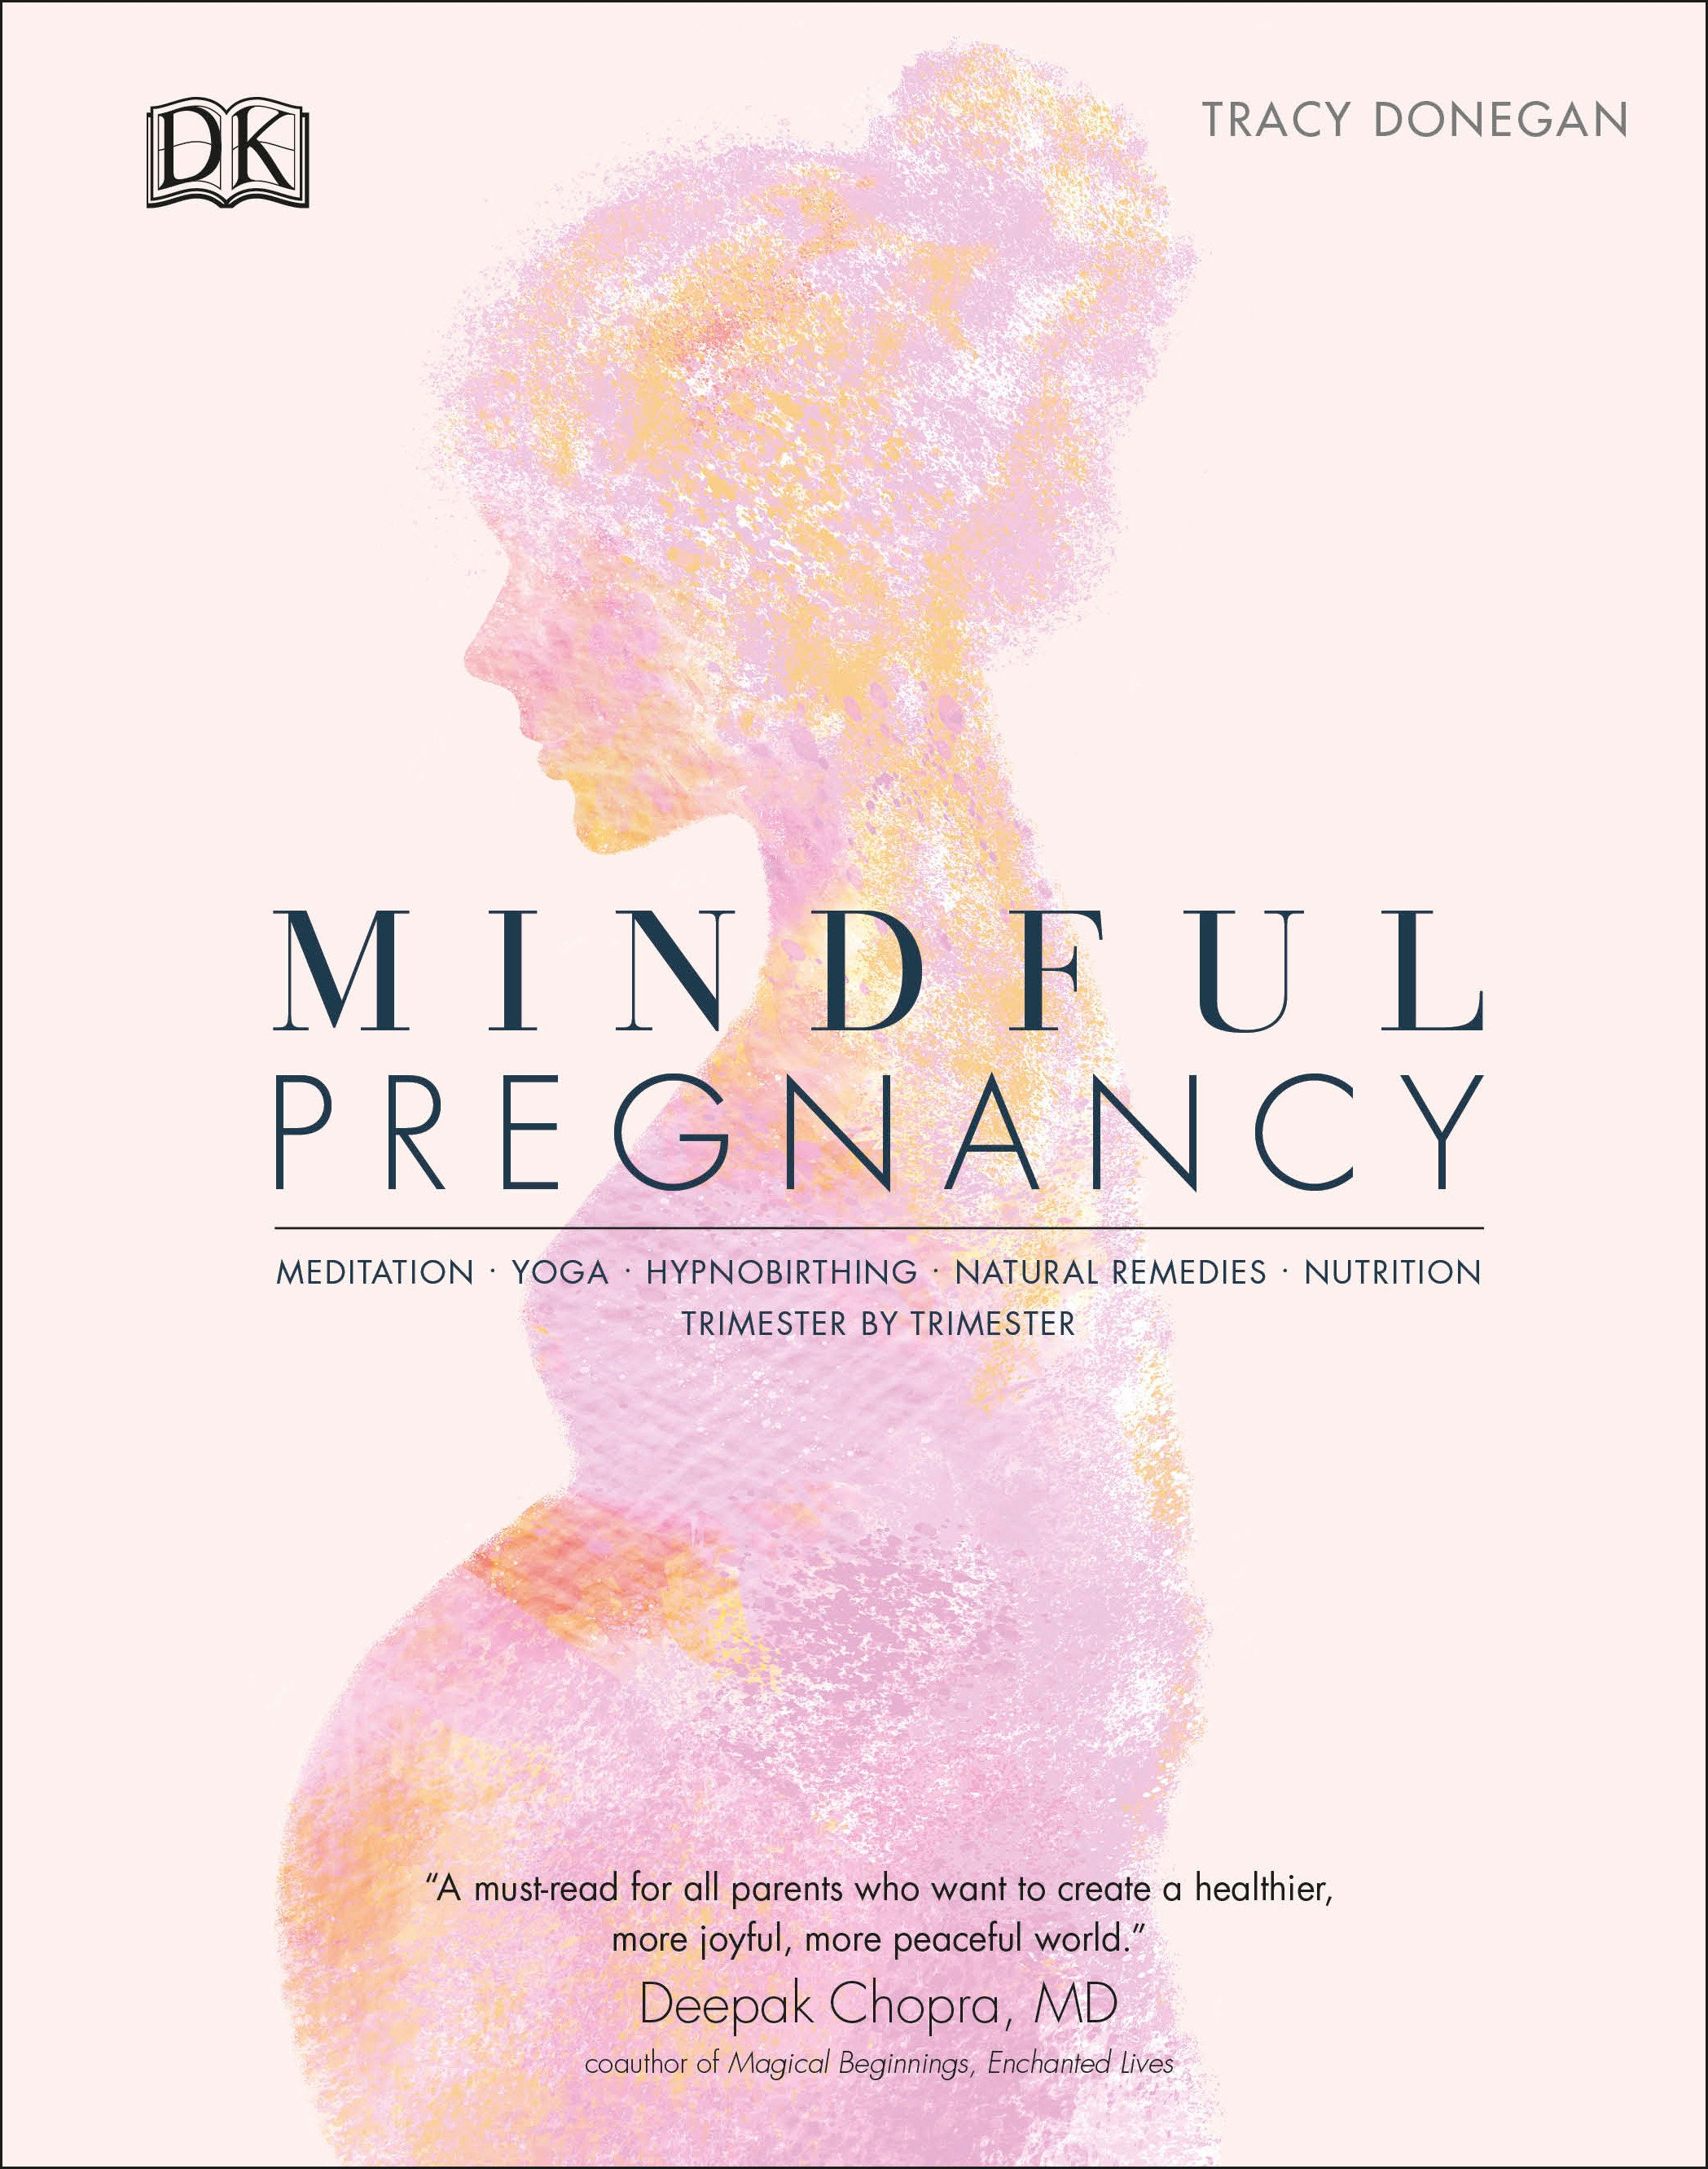 Mindful Pregnancy (Hardcover Book)